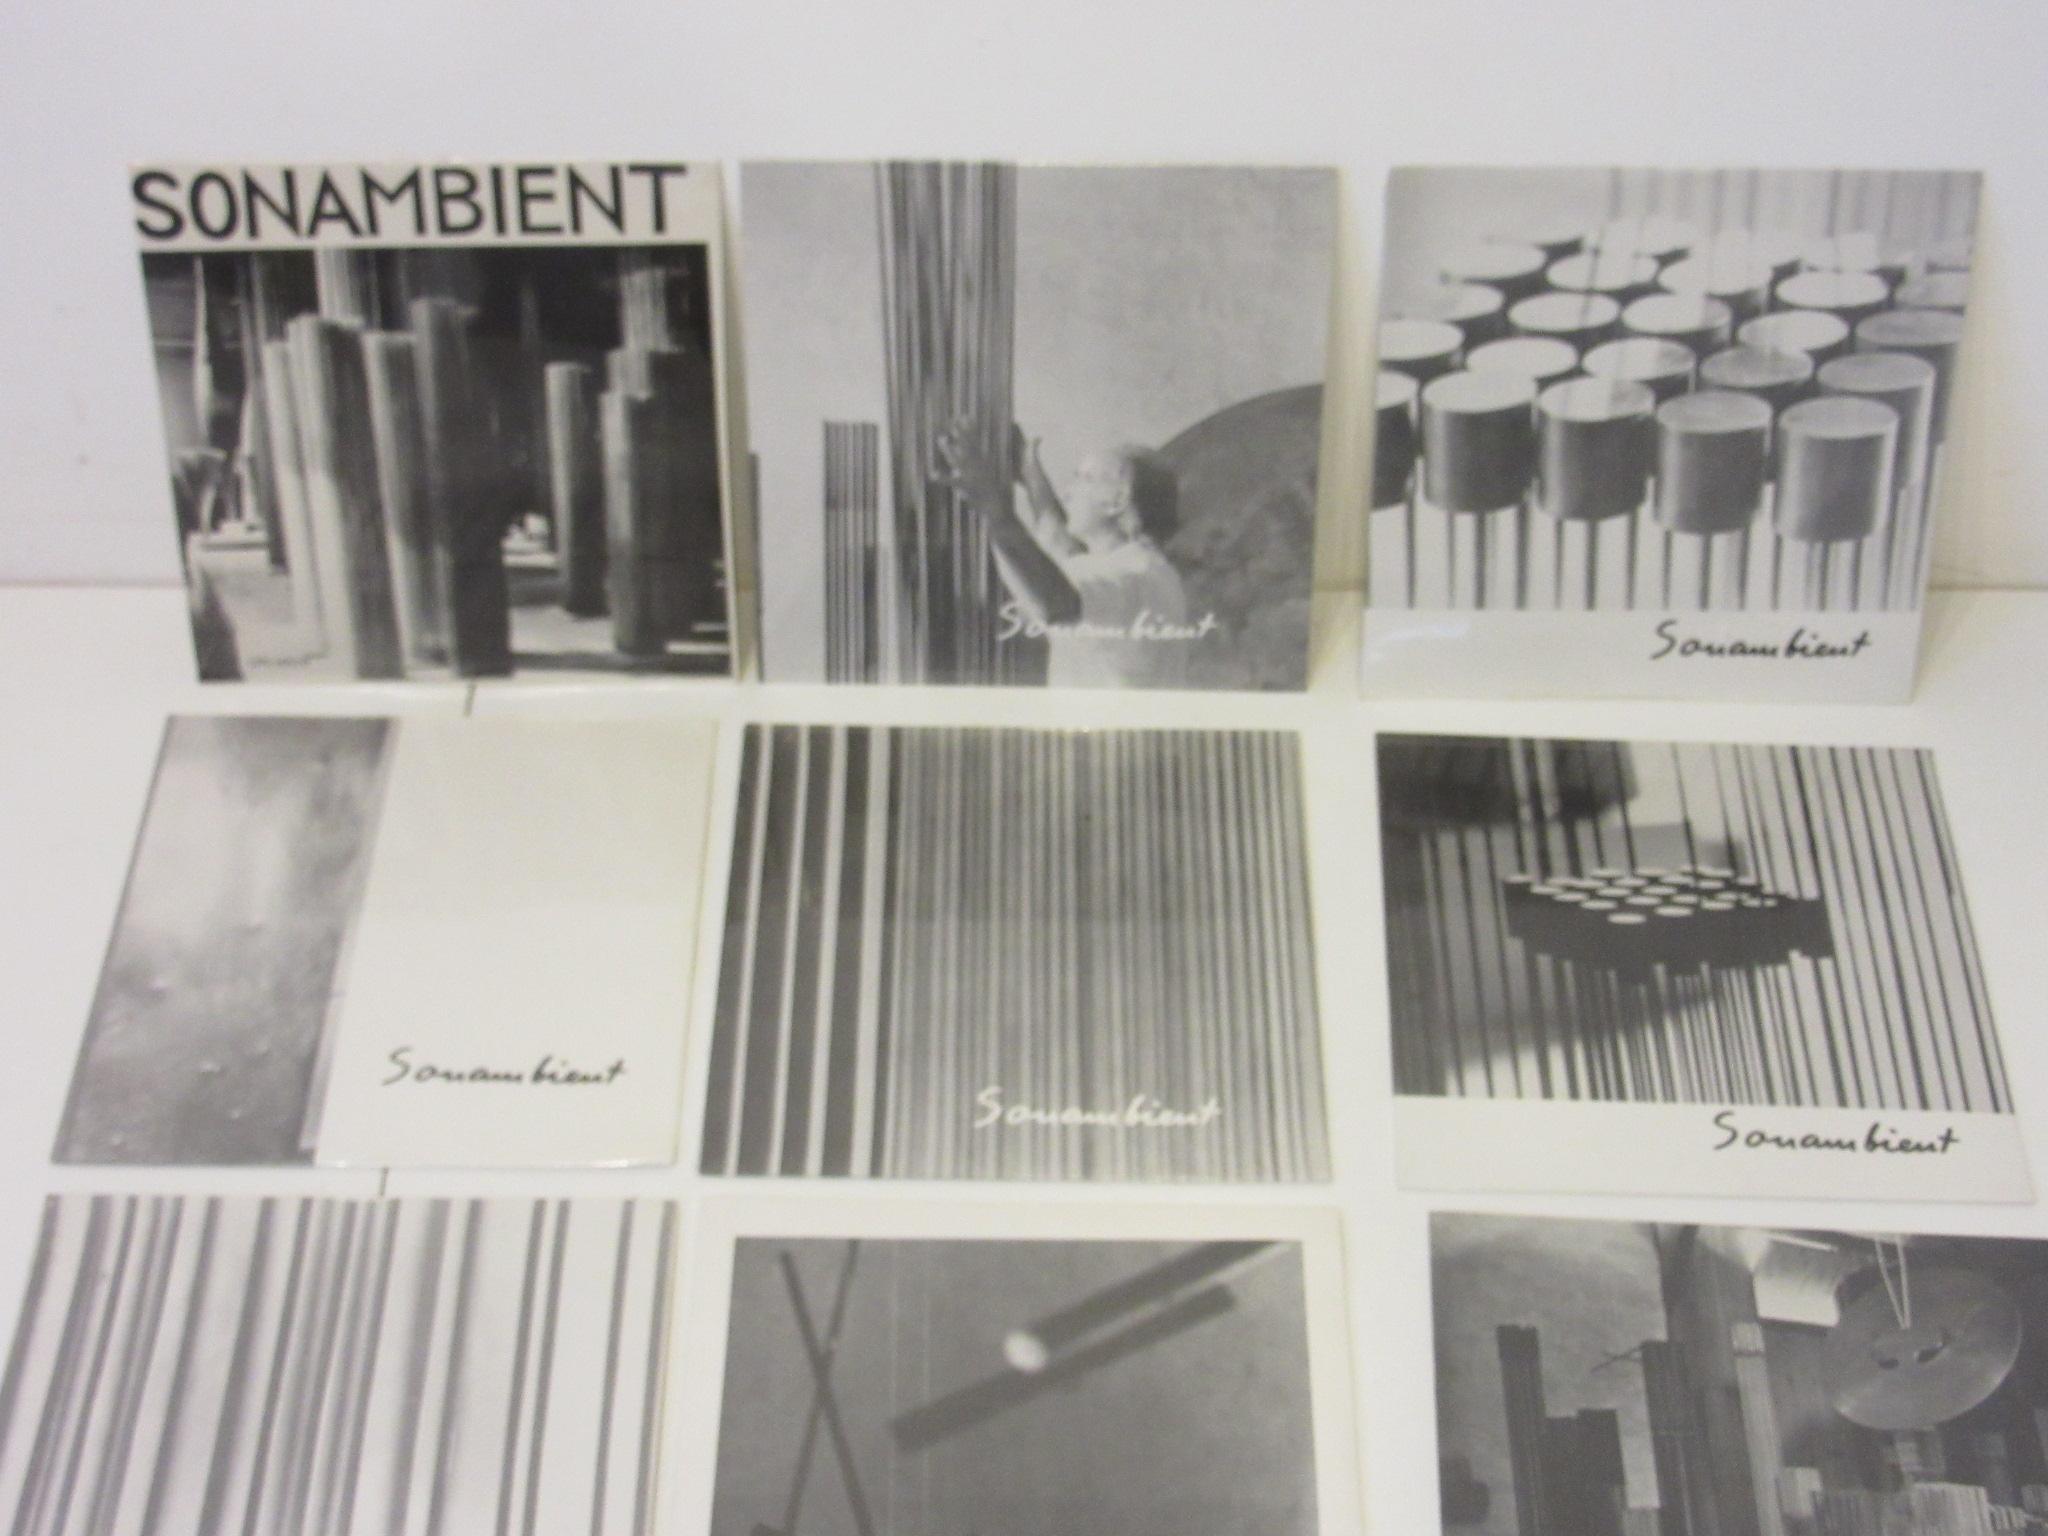 A set of ten sealed unplayed Sonambient LP records by Harry Bertoia of his sound sculptures these ten from the period albums trace his different handcrafted sculptures making the sounds as he intended. Each cover has a picture of the sculpture